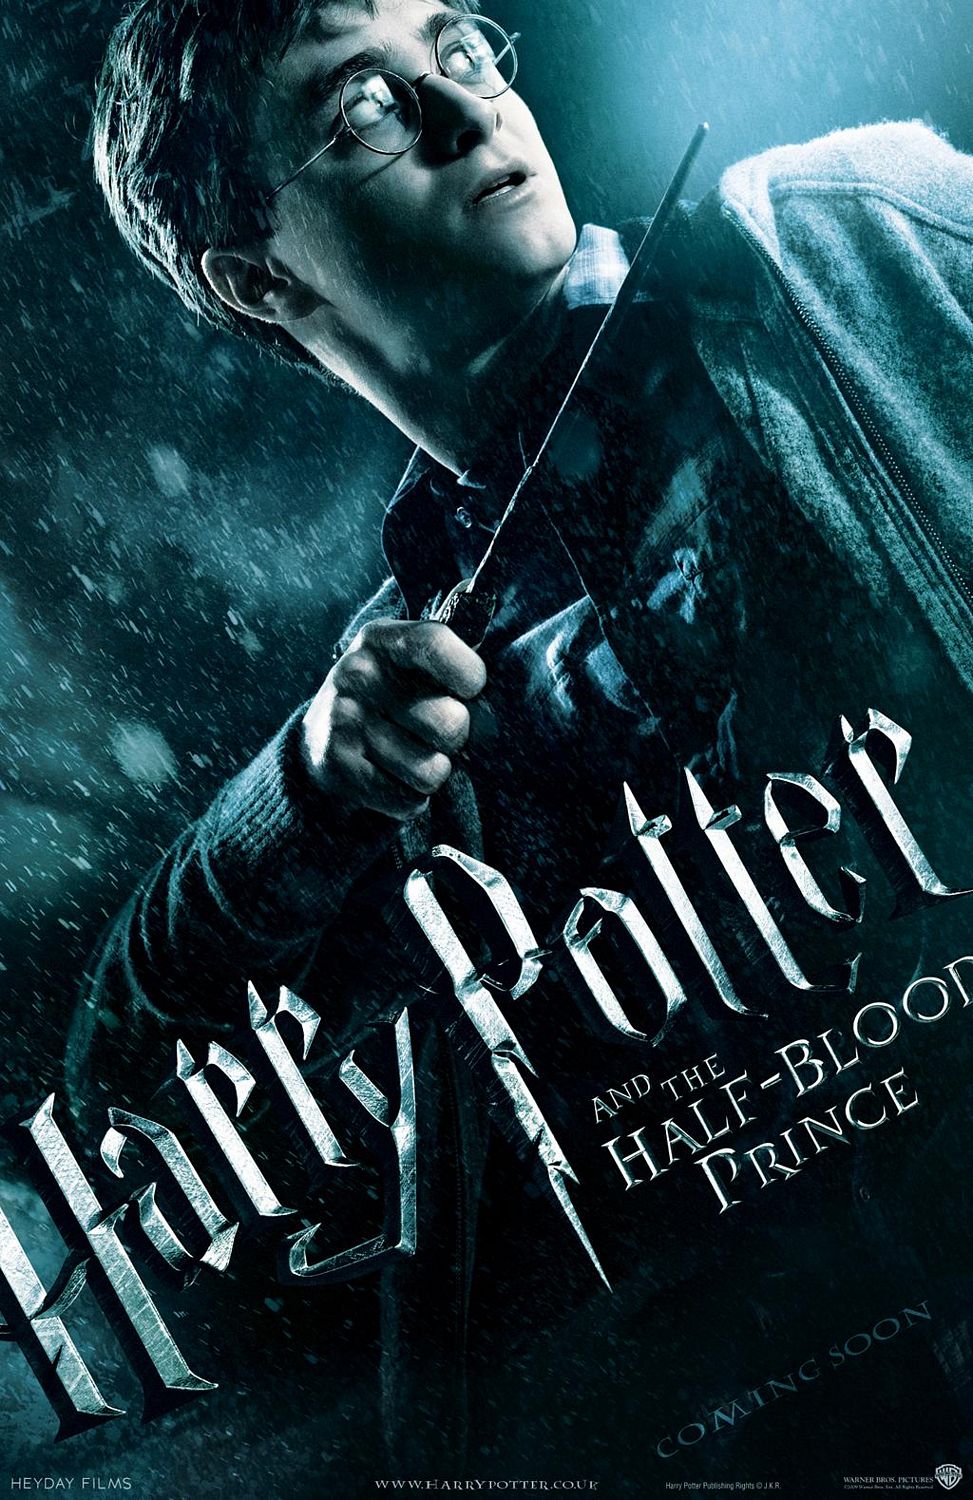 HARRY POTTER AND THE HALF-BLOOD PRINCE (2009)